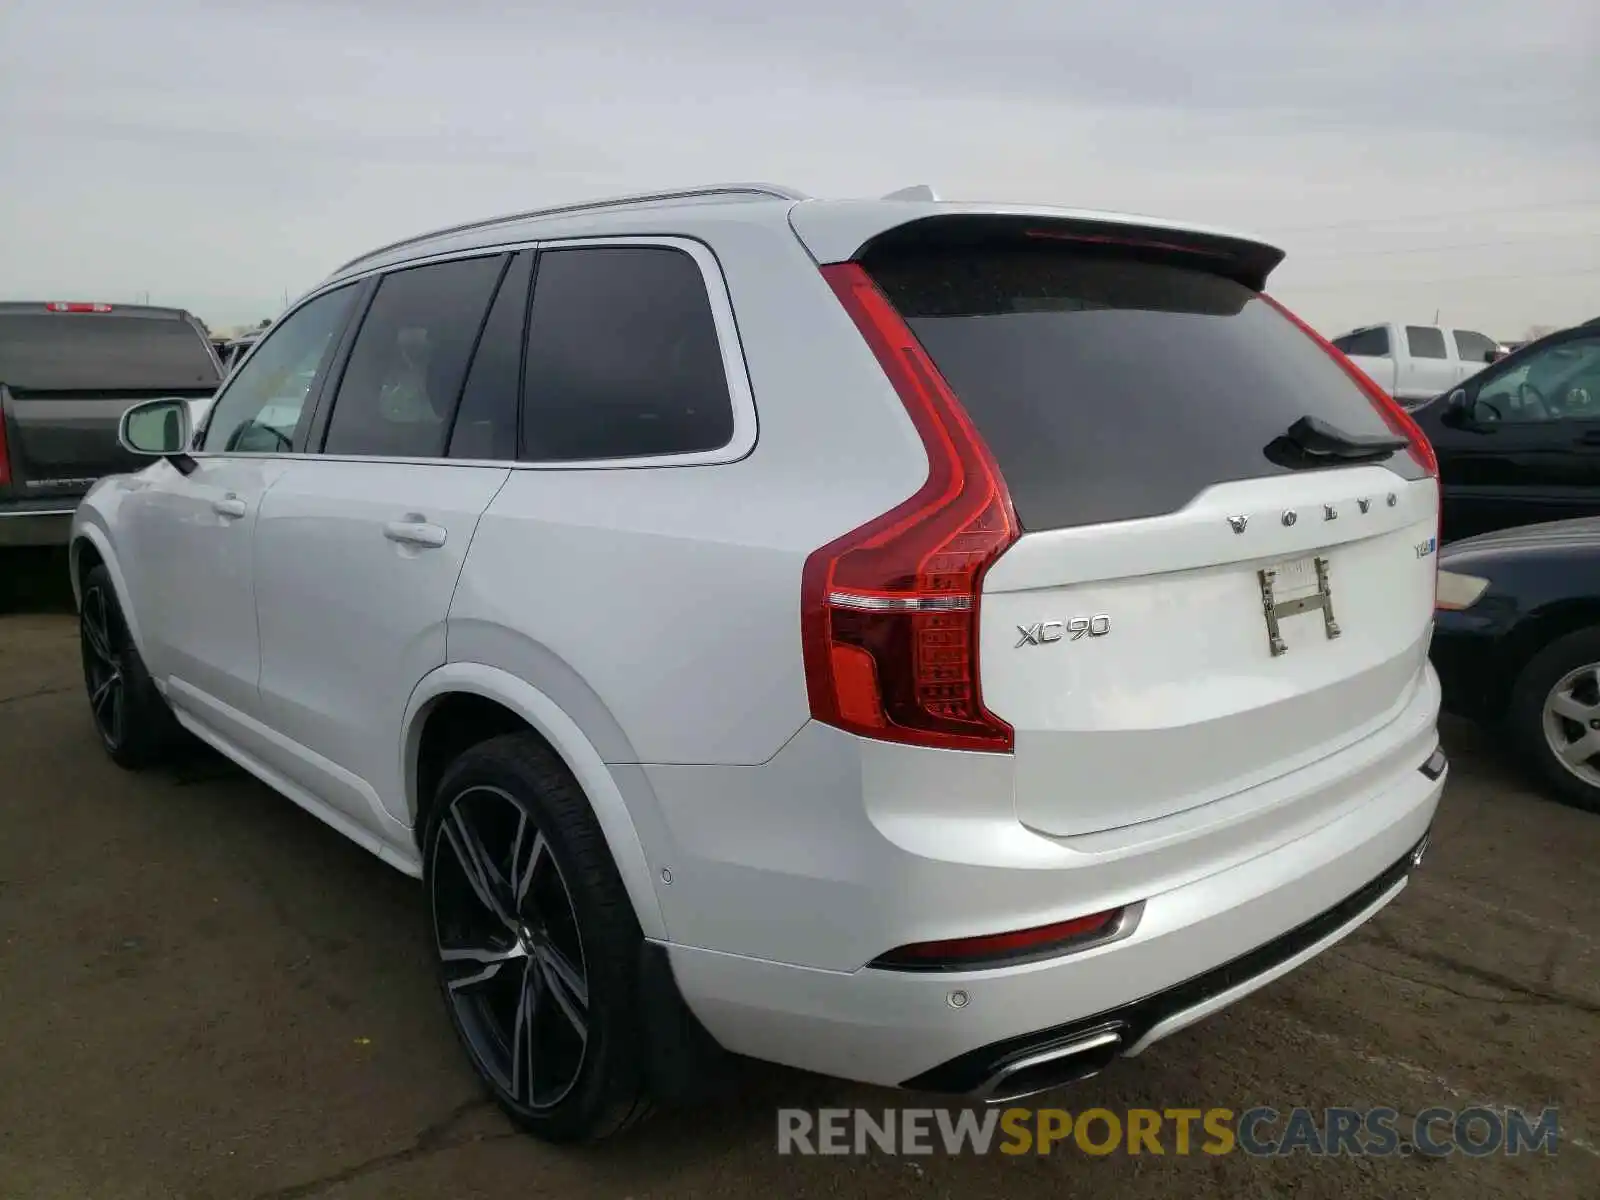 3 Photograph of a damaged car YV4A22PMXK1456925 VOLVO XC90 2019